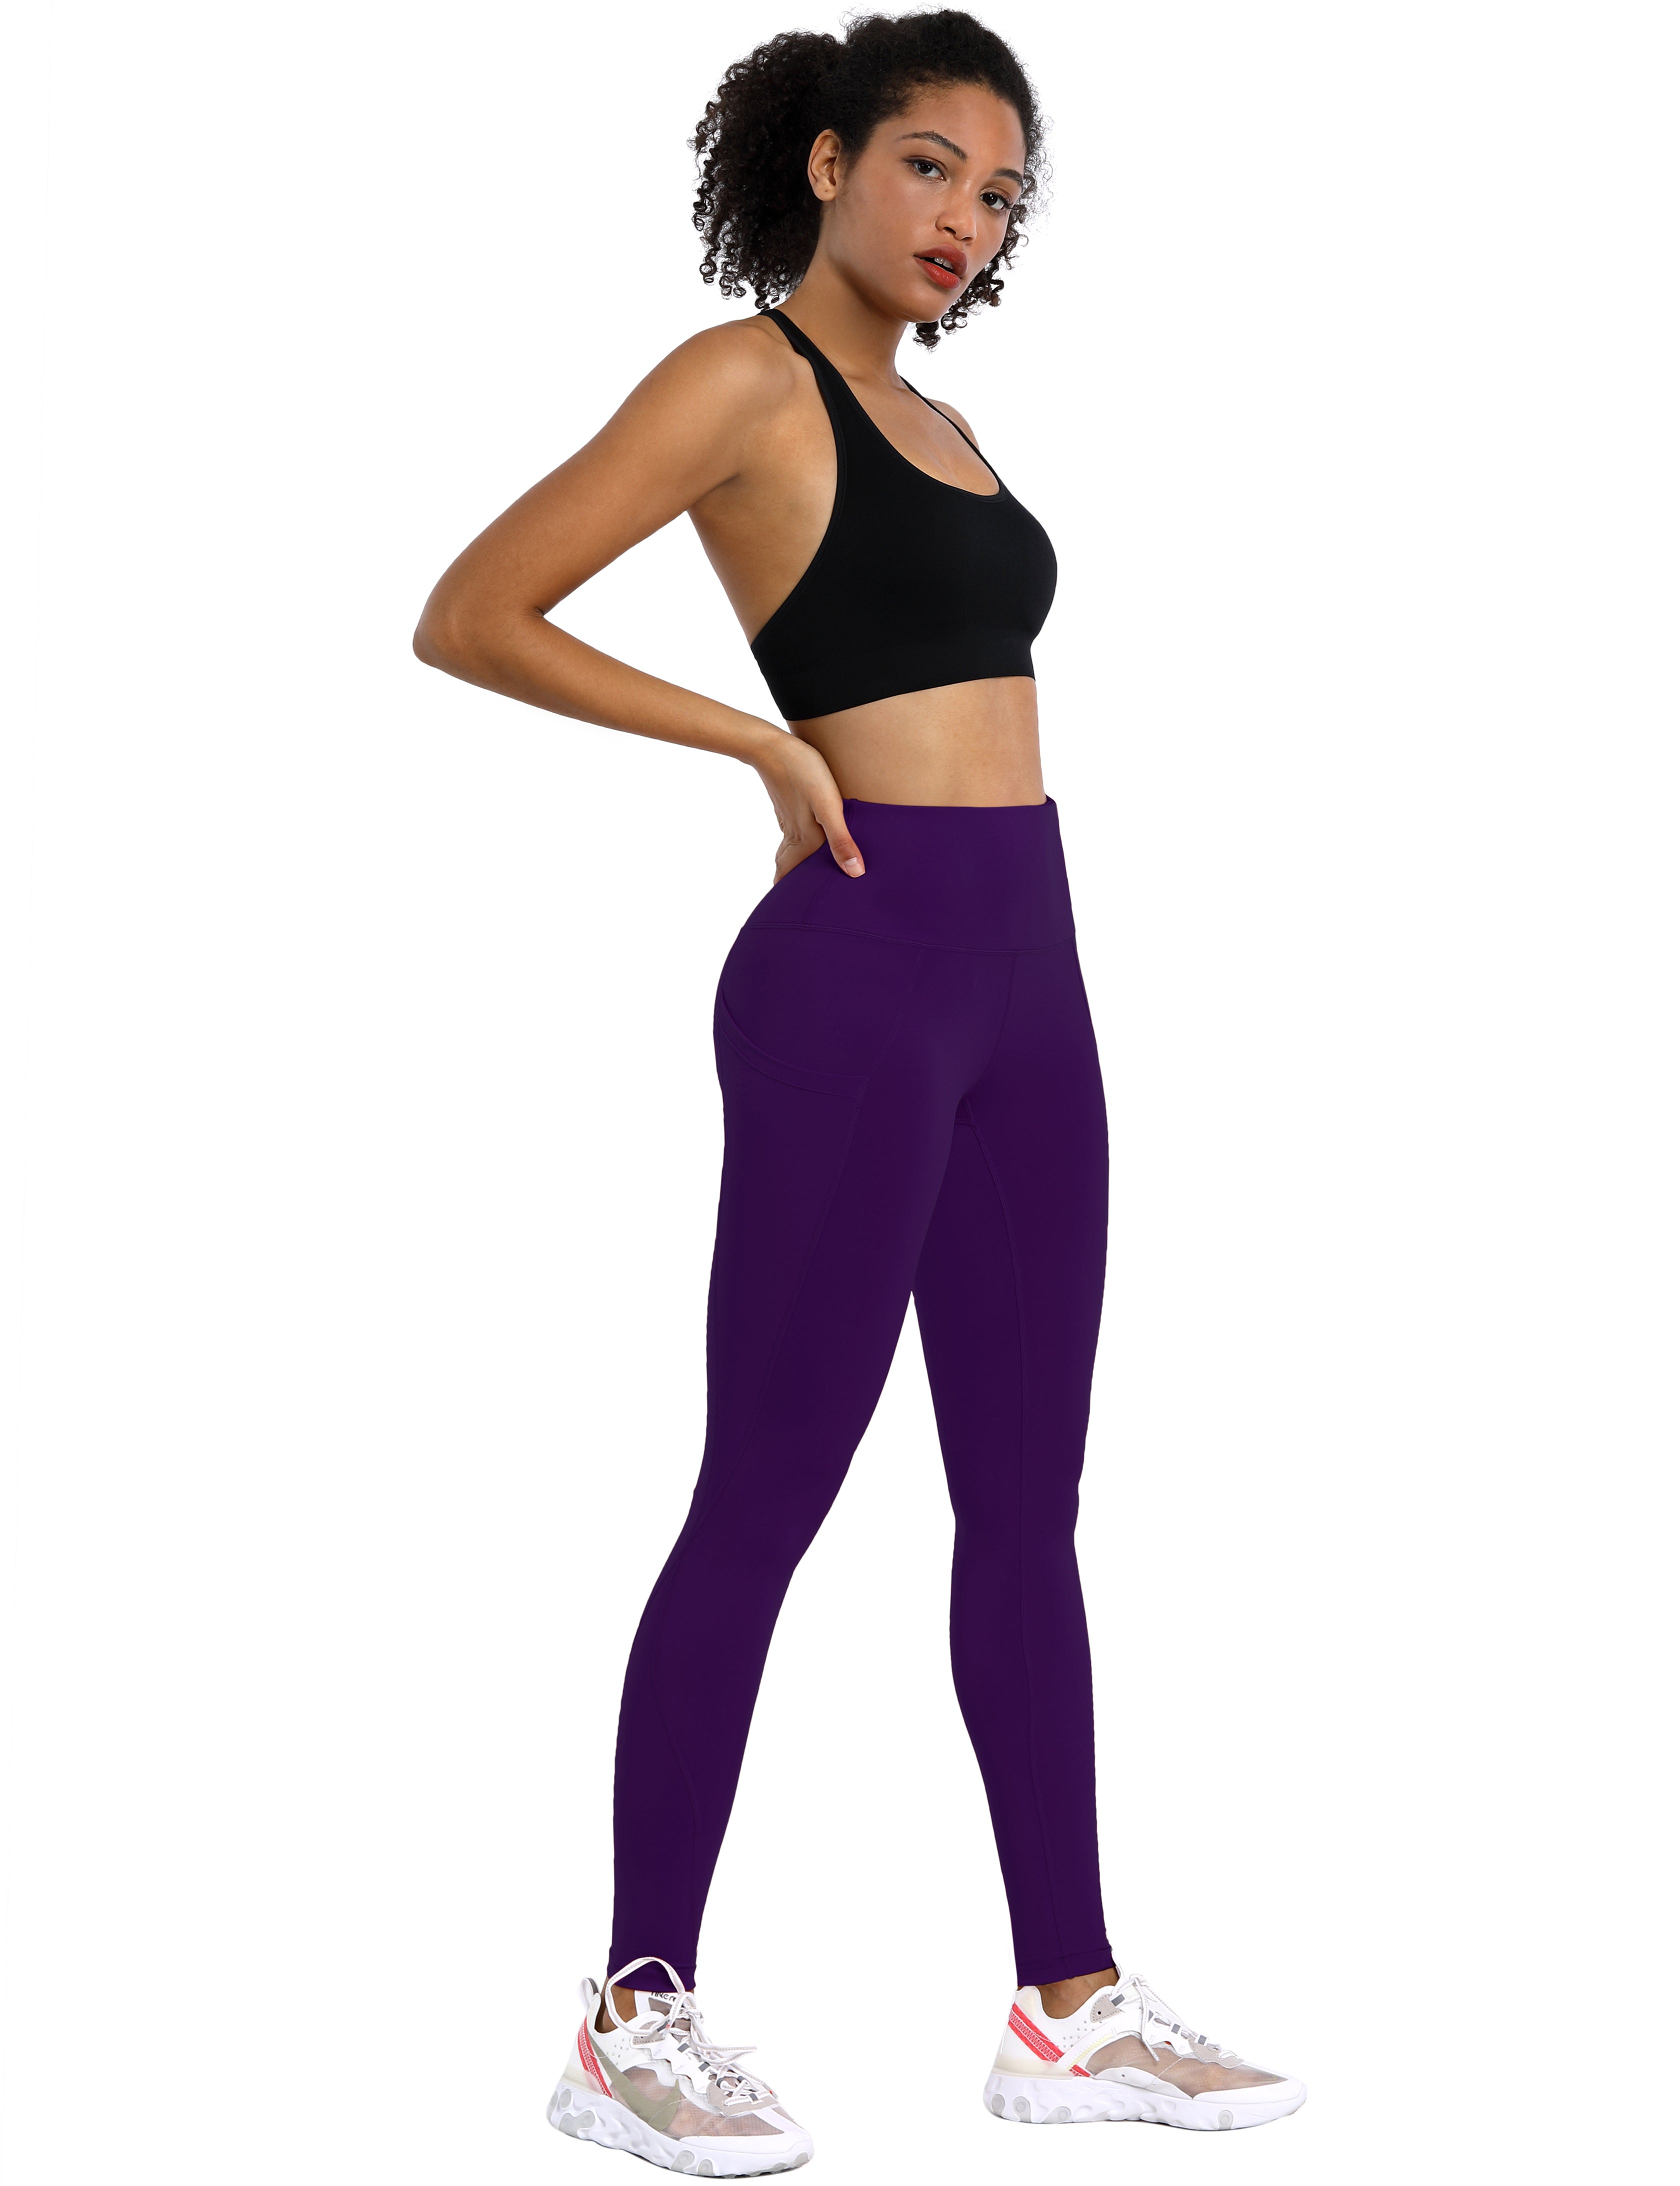 High Waist Side Pockets Running Pants pansypurple 75% Nylon, 25% Spandex Fabric doesn't attract lint easily 4-way stretch No see-through Moisture-wicking Tummy control Inner pocket